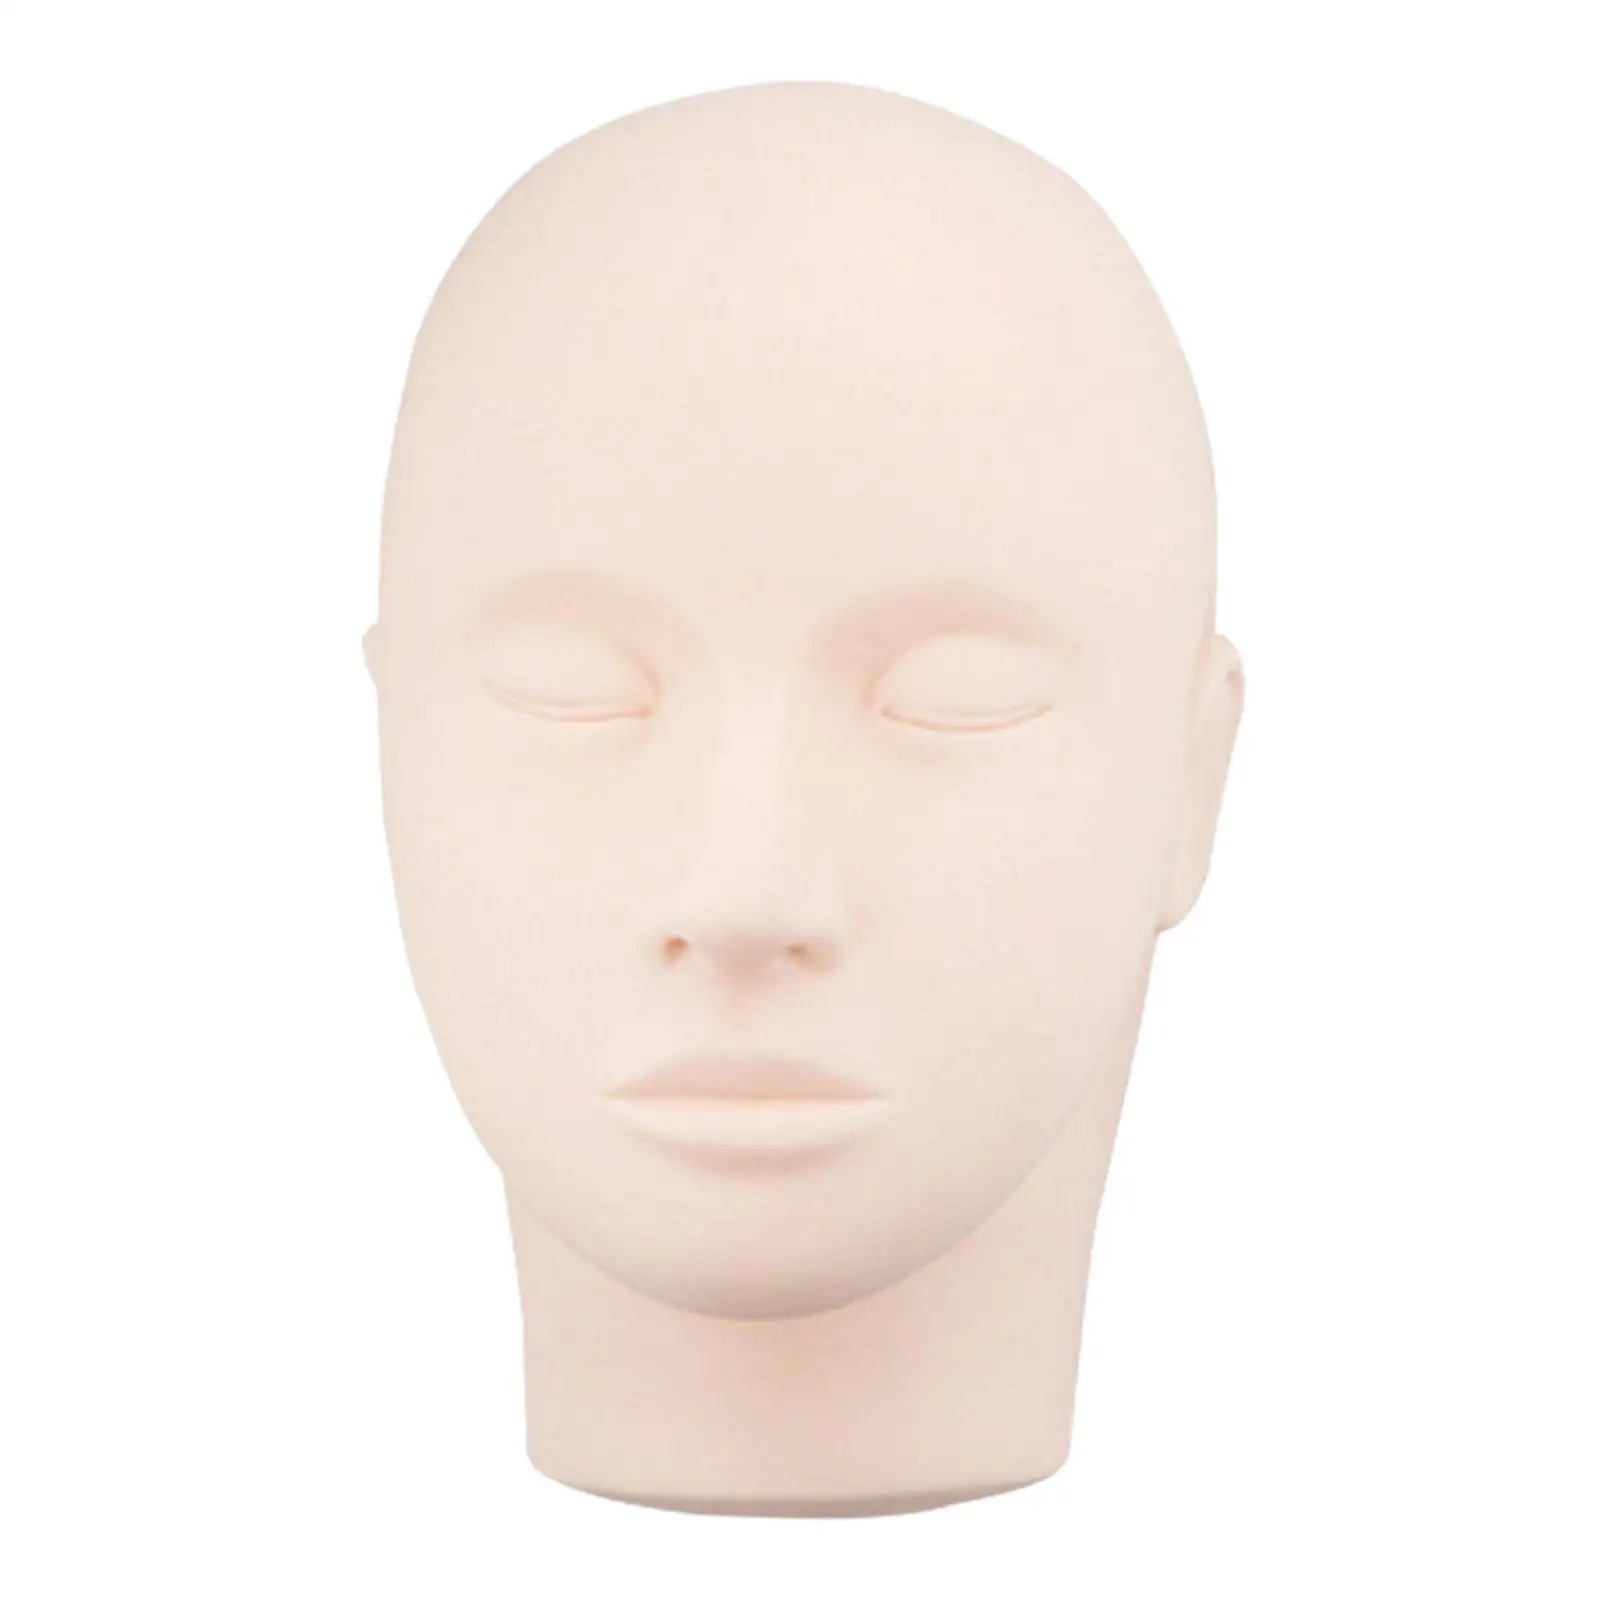 Extension Silicone Head Extension Supplies Practice Touch Model Head for